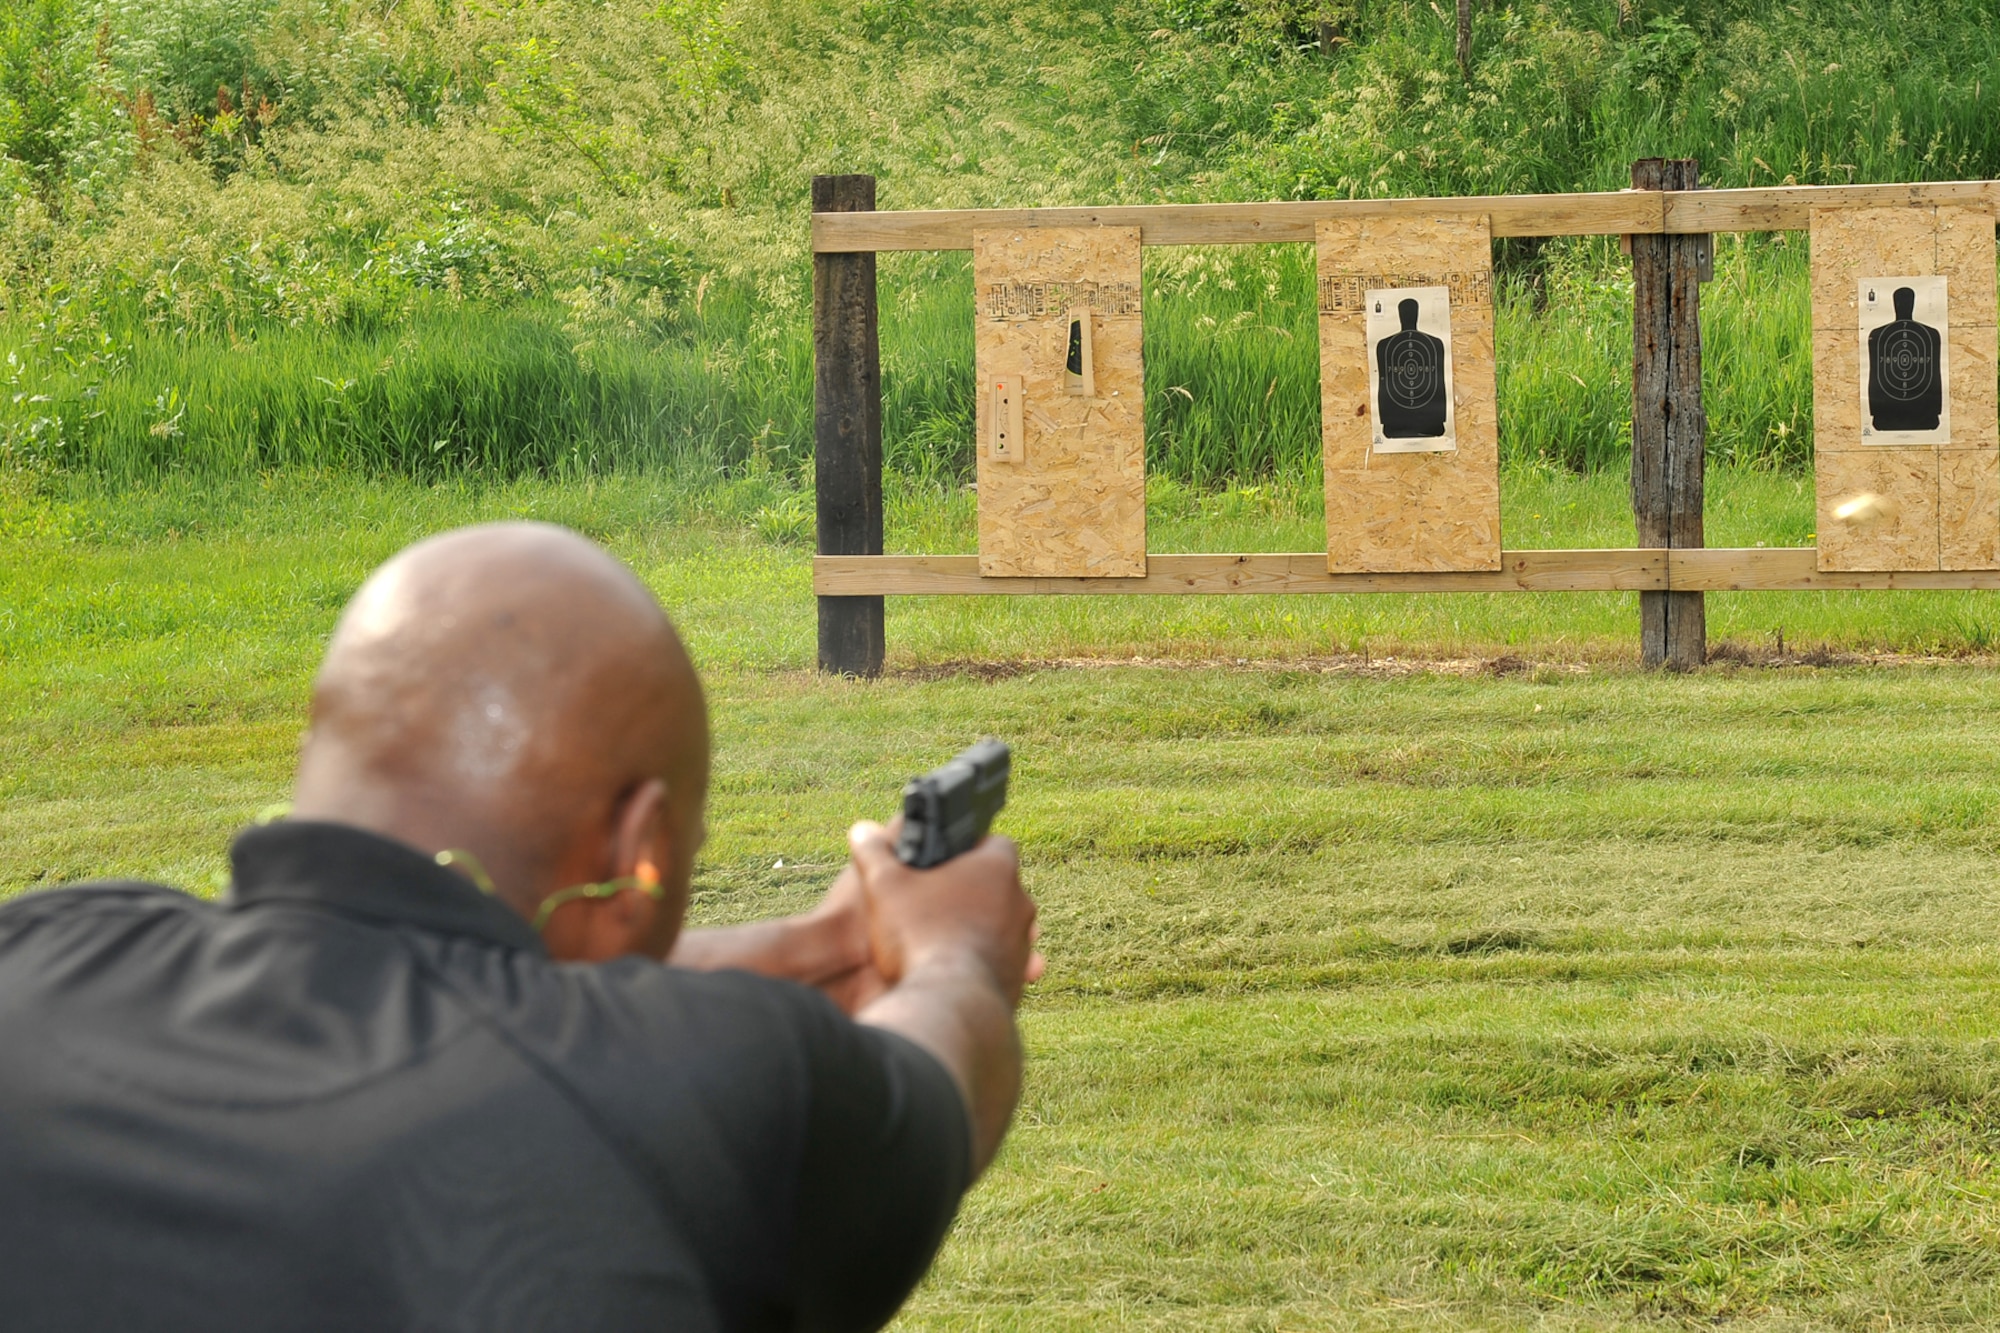 A special agent from the Air Force Office of Special Investigations shoots at a target during the AFOSI pistol competition held at the Bellevue Rod and Gun Club in Bellevue, Neb. June 17.  Various law enforcement agencies participated in this training exercise to sharpen their skills while strengthening the comradery between them. 

U.S. Air Force Photo by Charles Haymond/Release